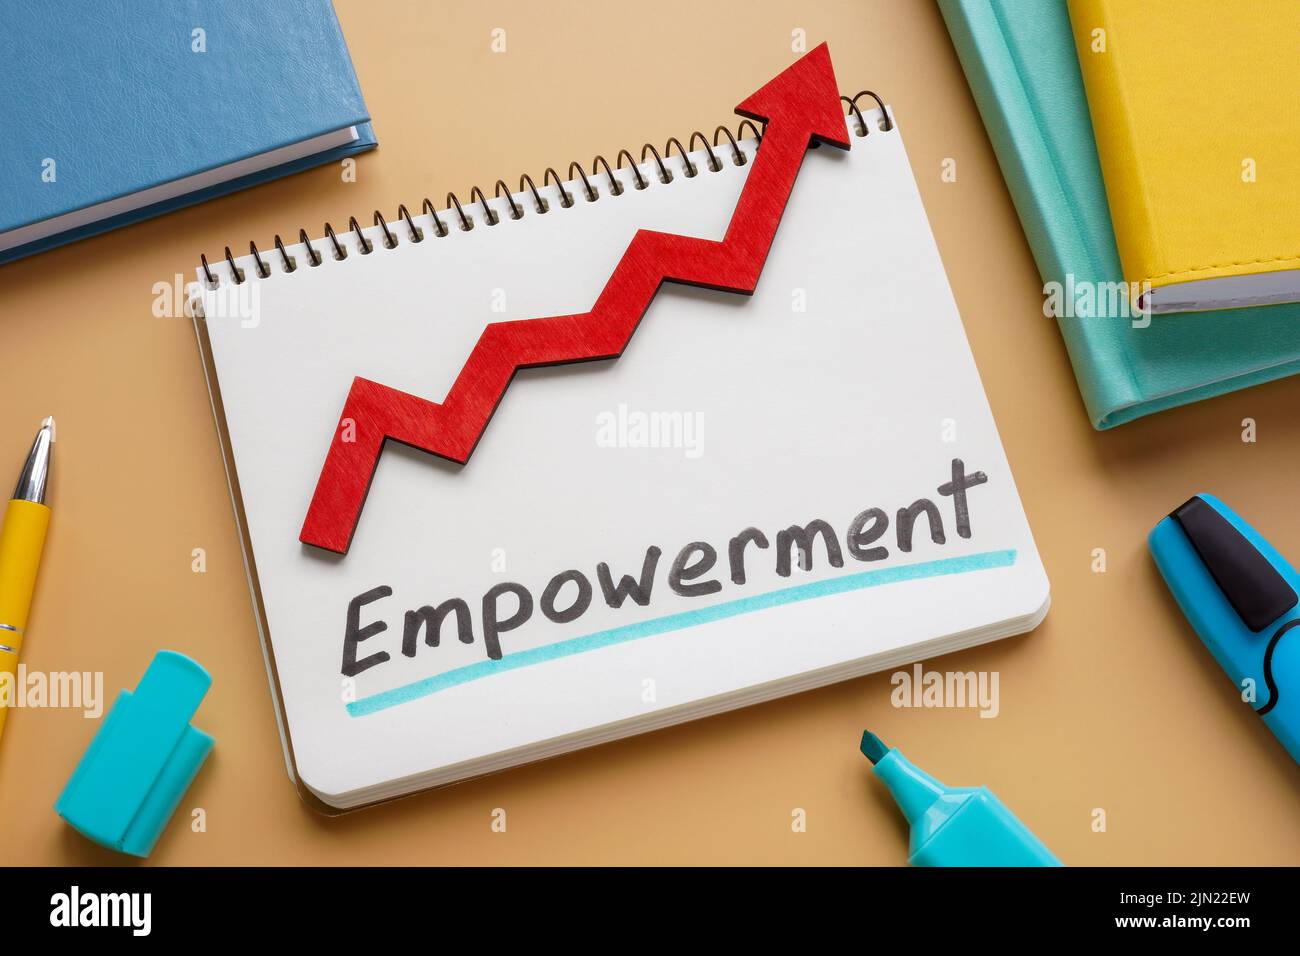 Handwritten word Empowerment and rising arrow on the notepad. Stock Photo